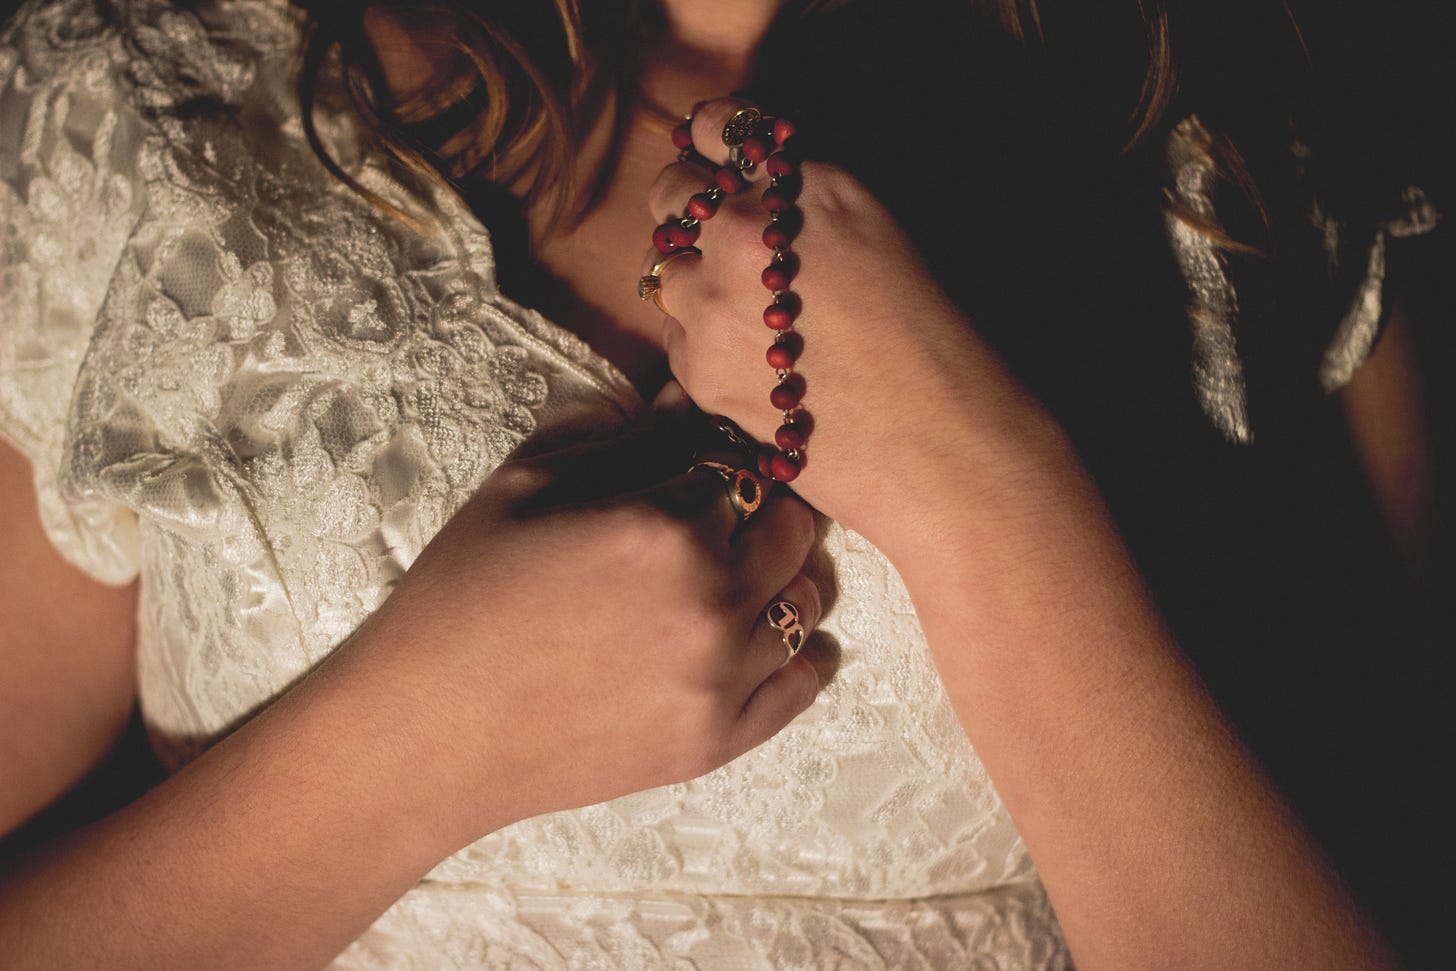 Woman in wedding dress holding rosary